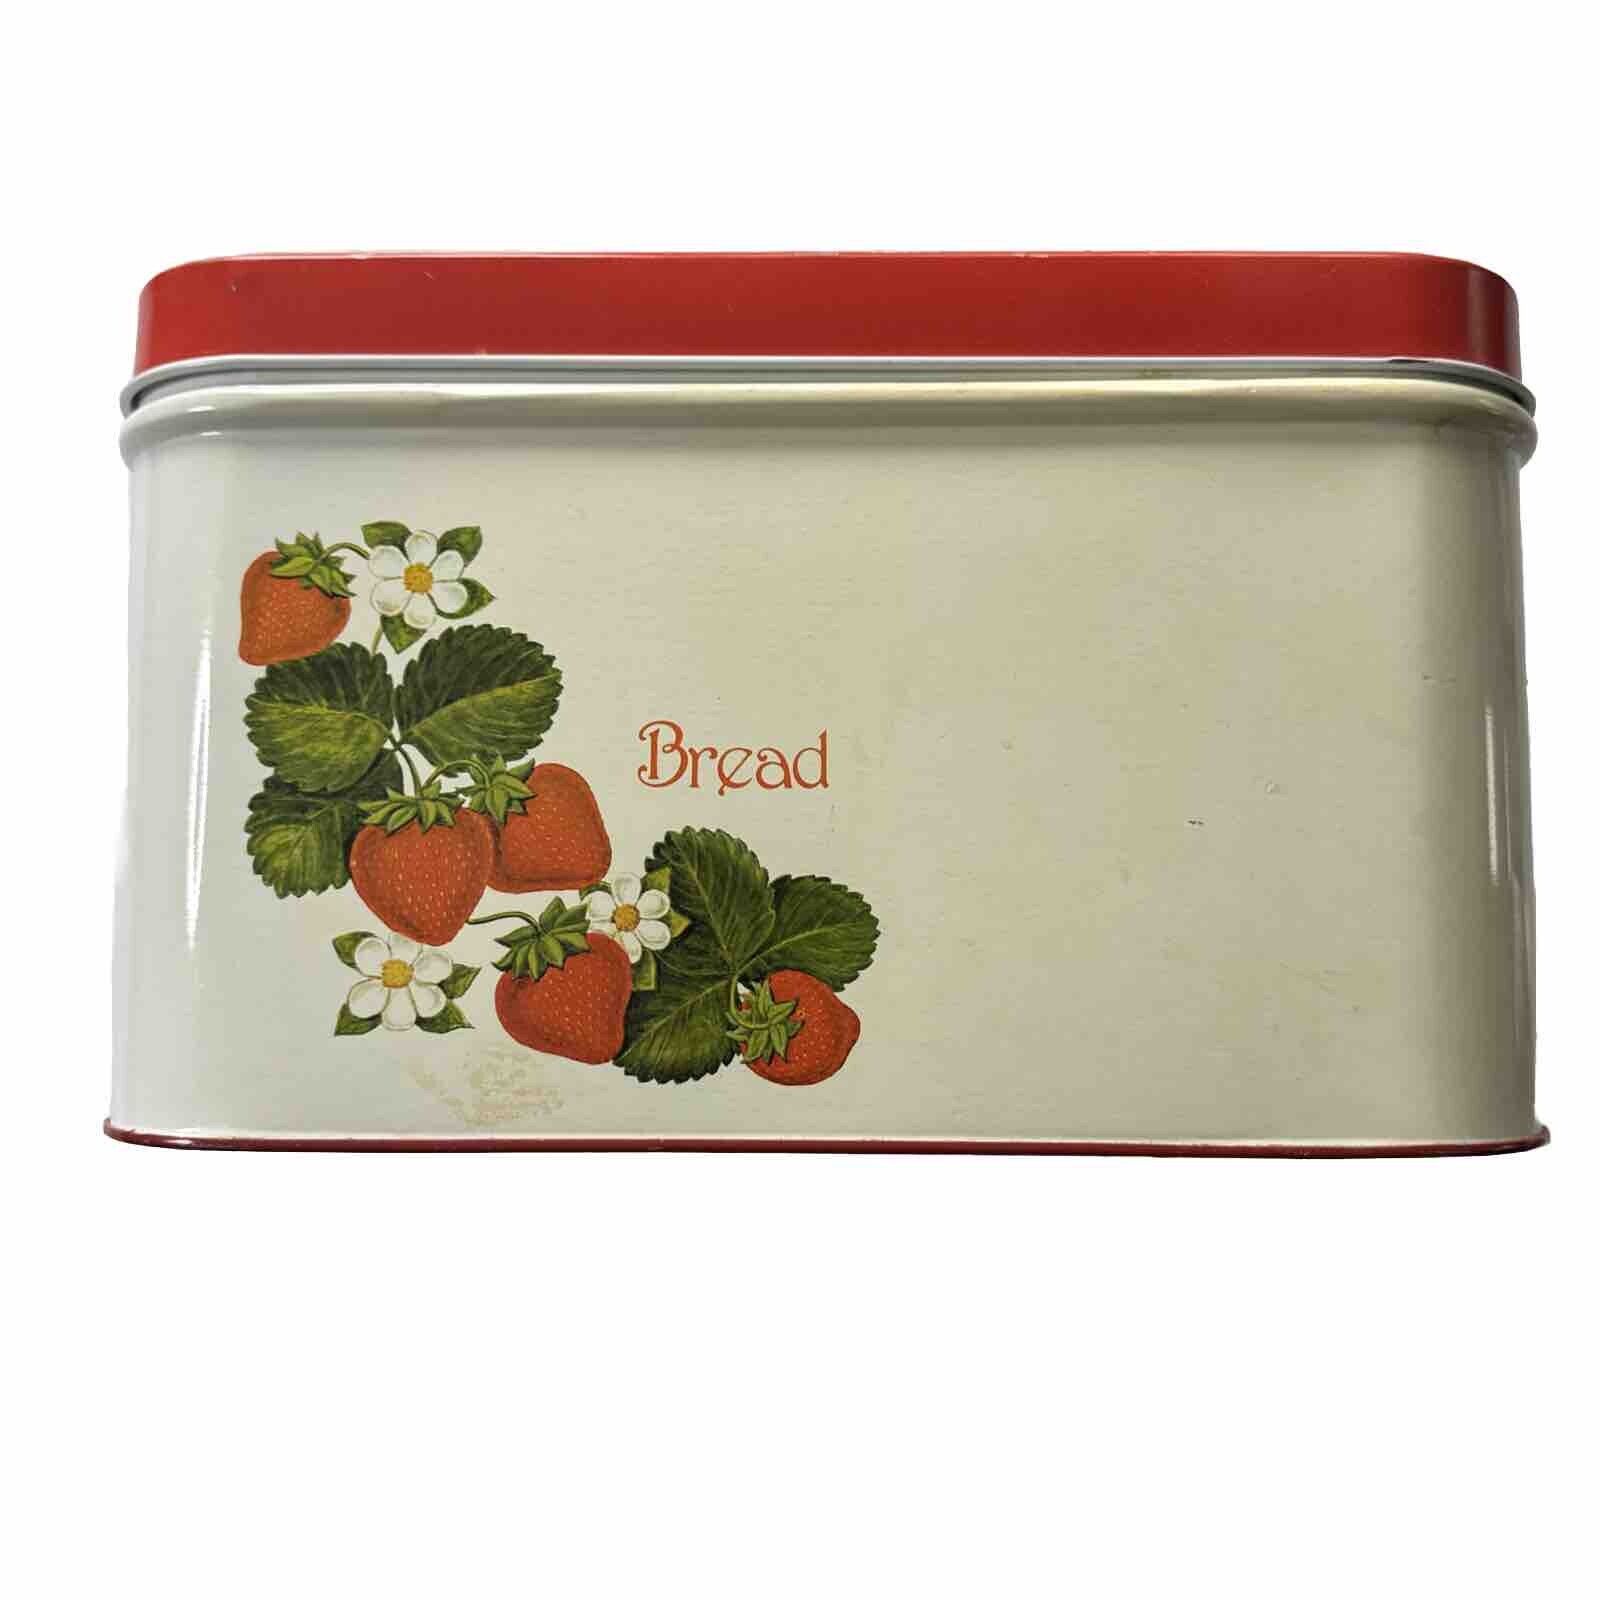 Vintage CHEINCO Bread Box Metal Strawberry Fields Forever Made In USA Retro Red